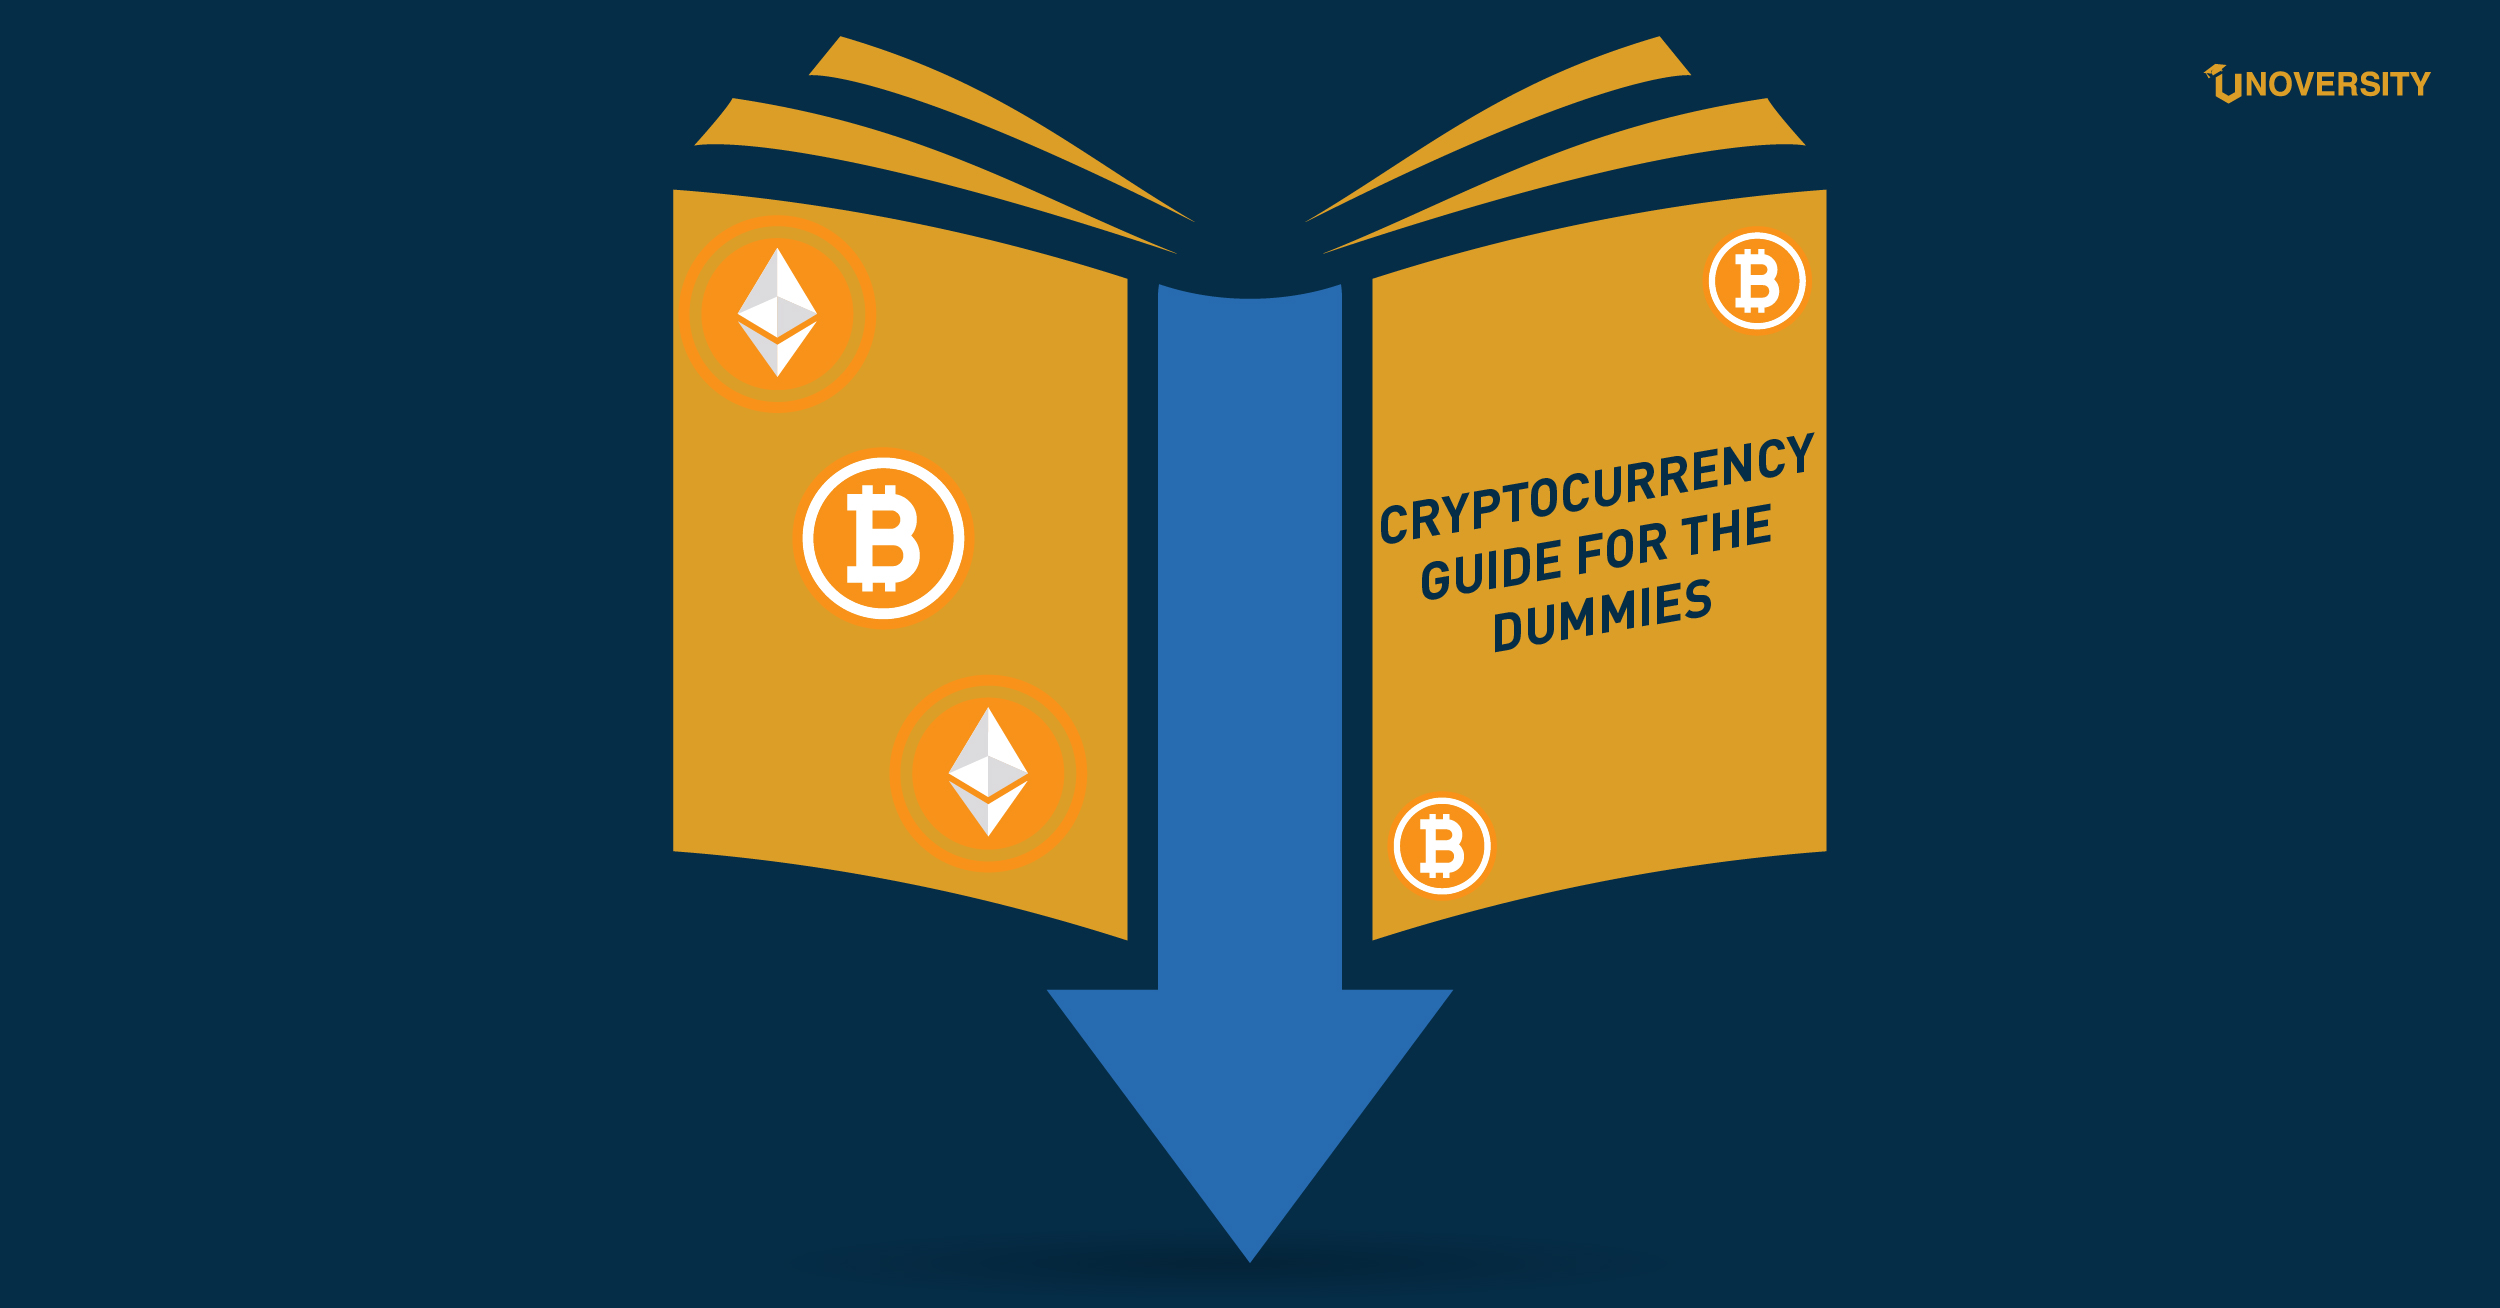 Cryptocurrency guide for the dummies - Unoversity